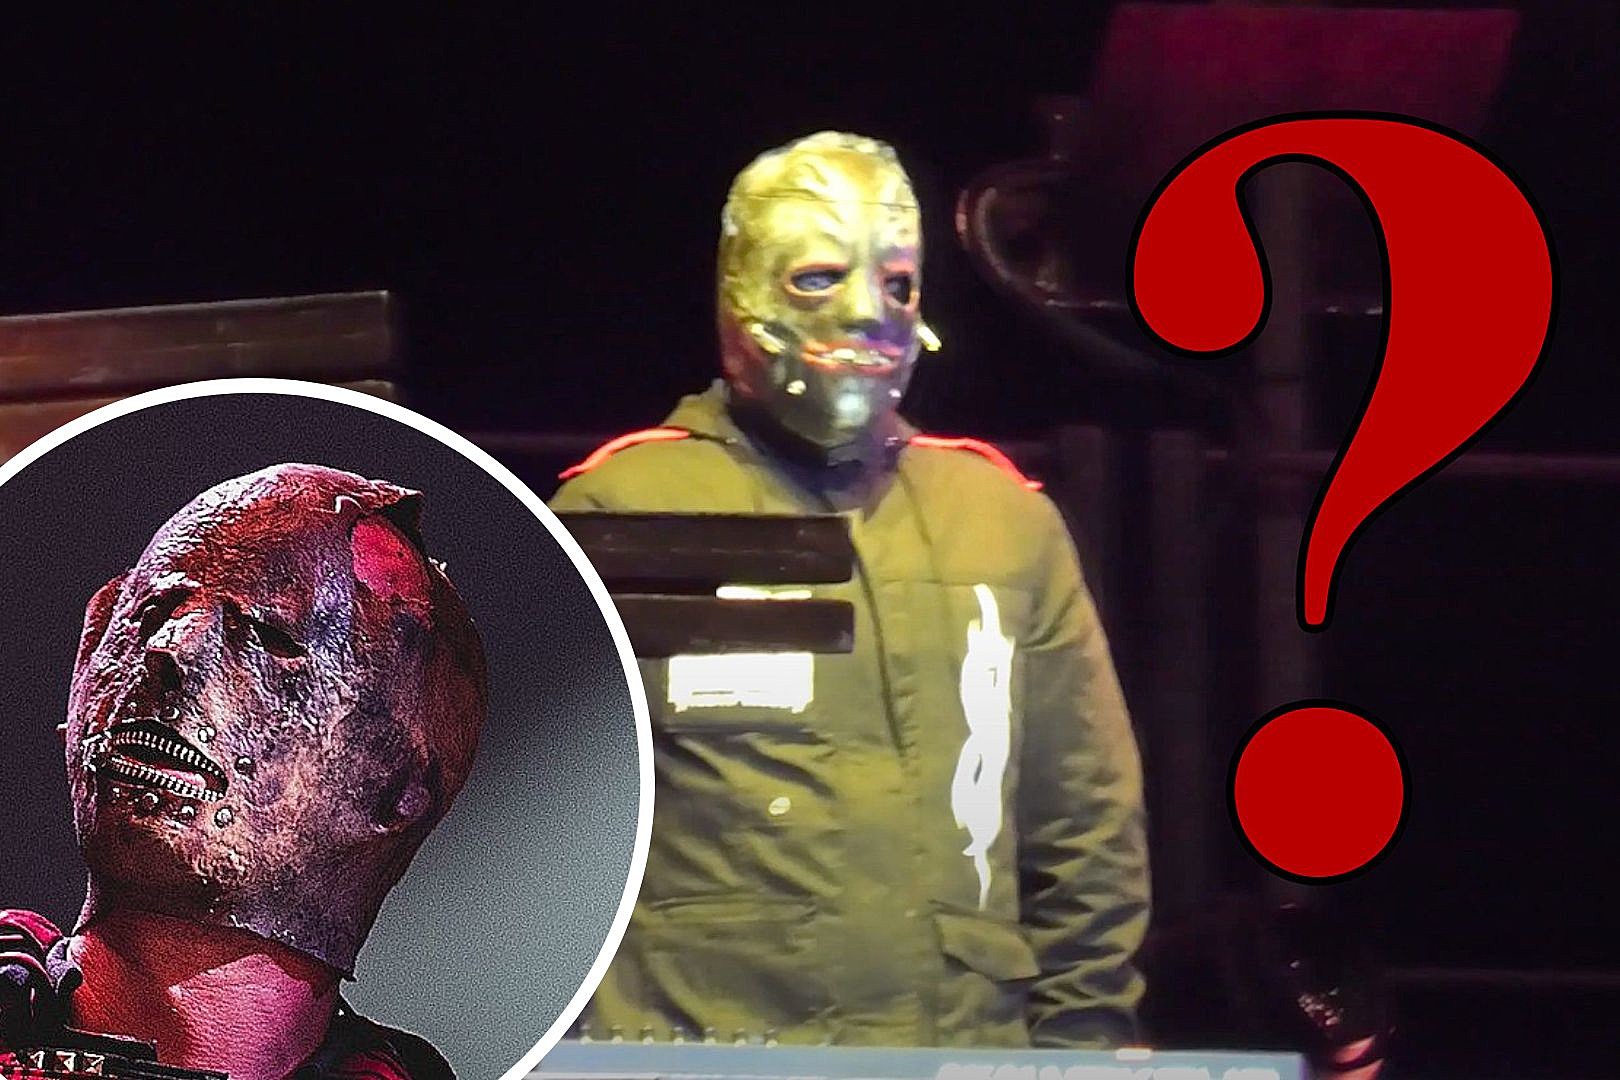 Identity of New Slipknot Keyboardist May Have Just Been Revealed